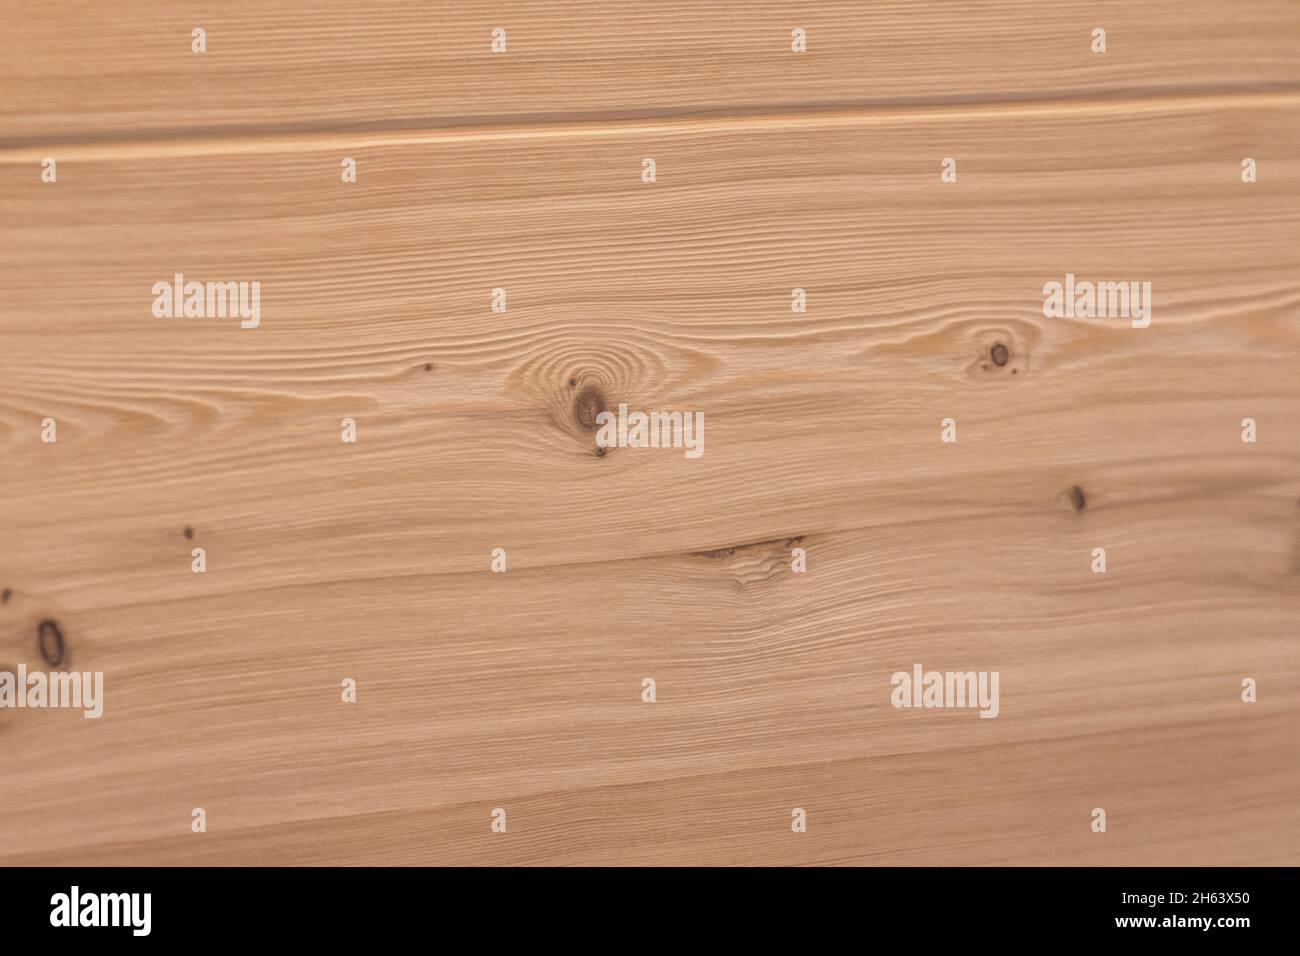 detail of a wooden plank,raw material,woodworking Stock Photo